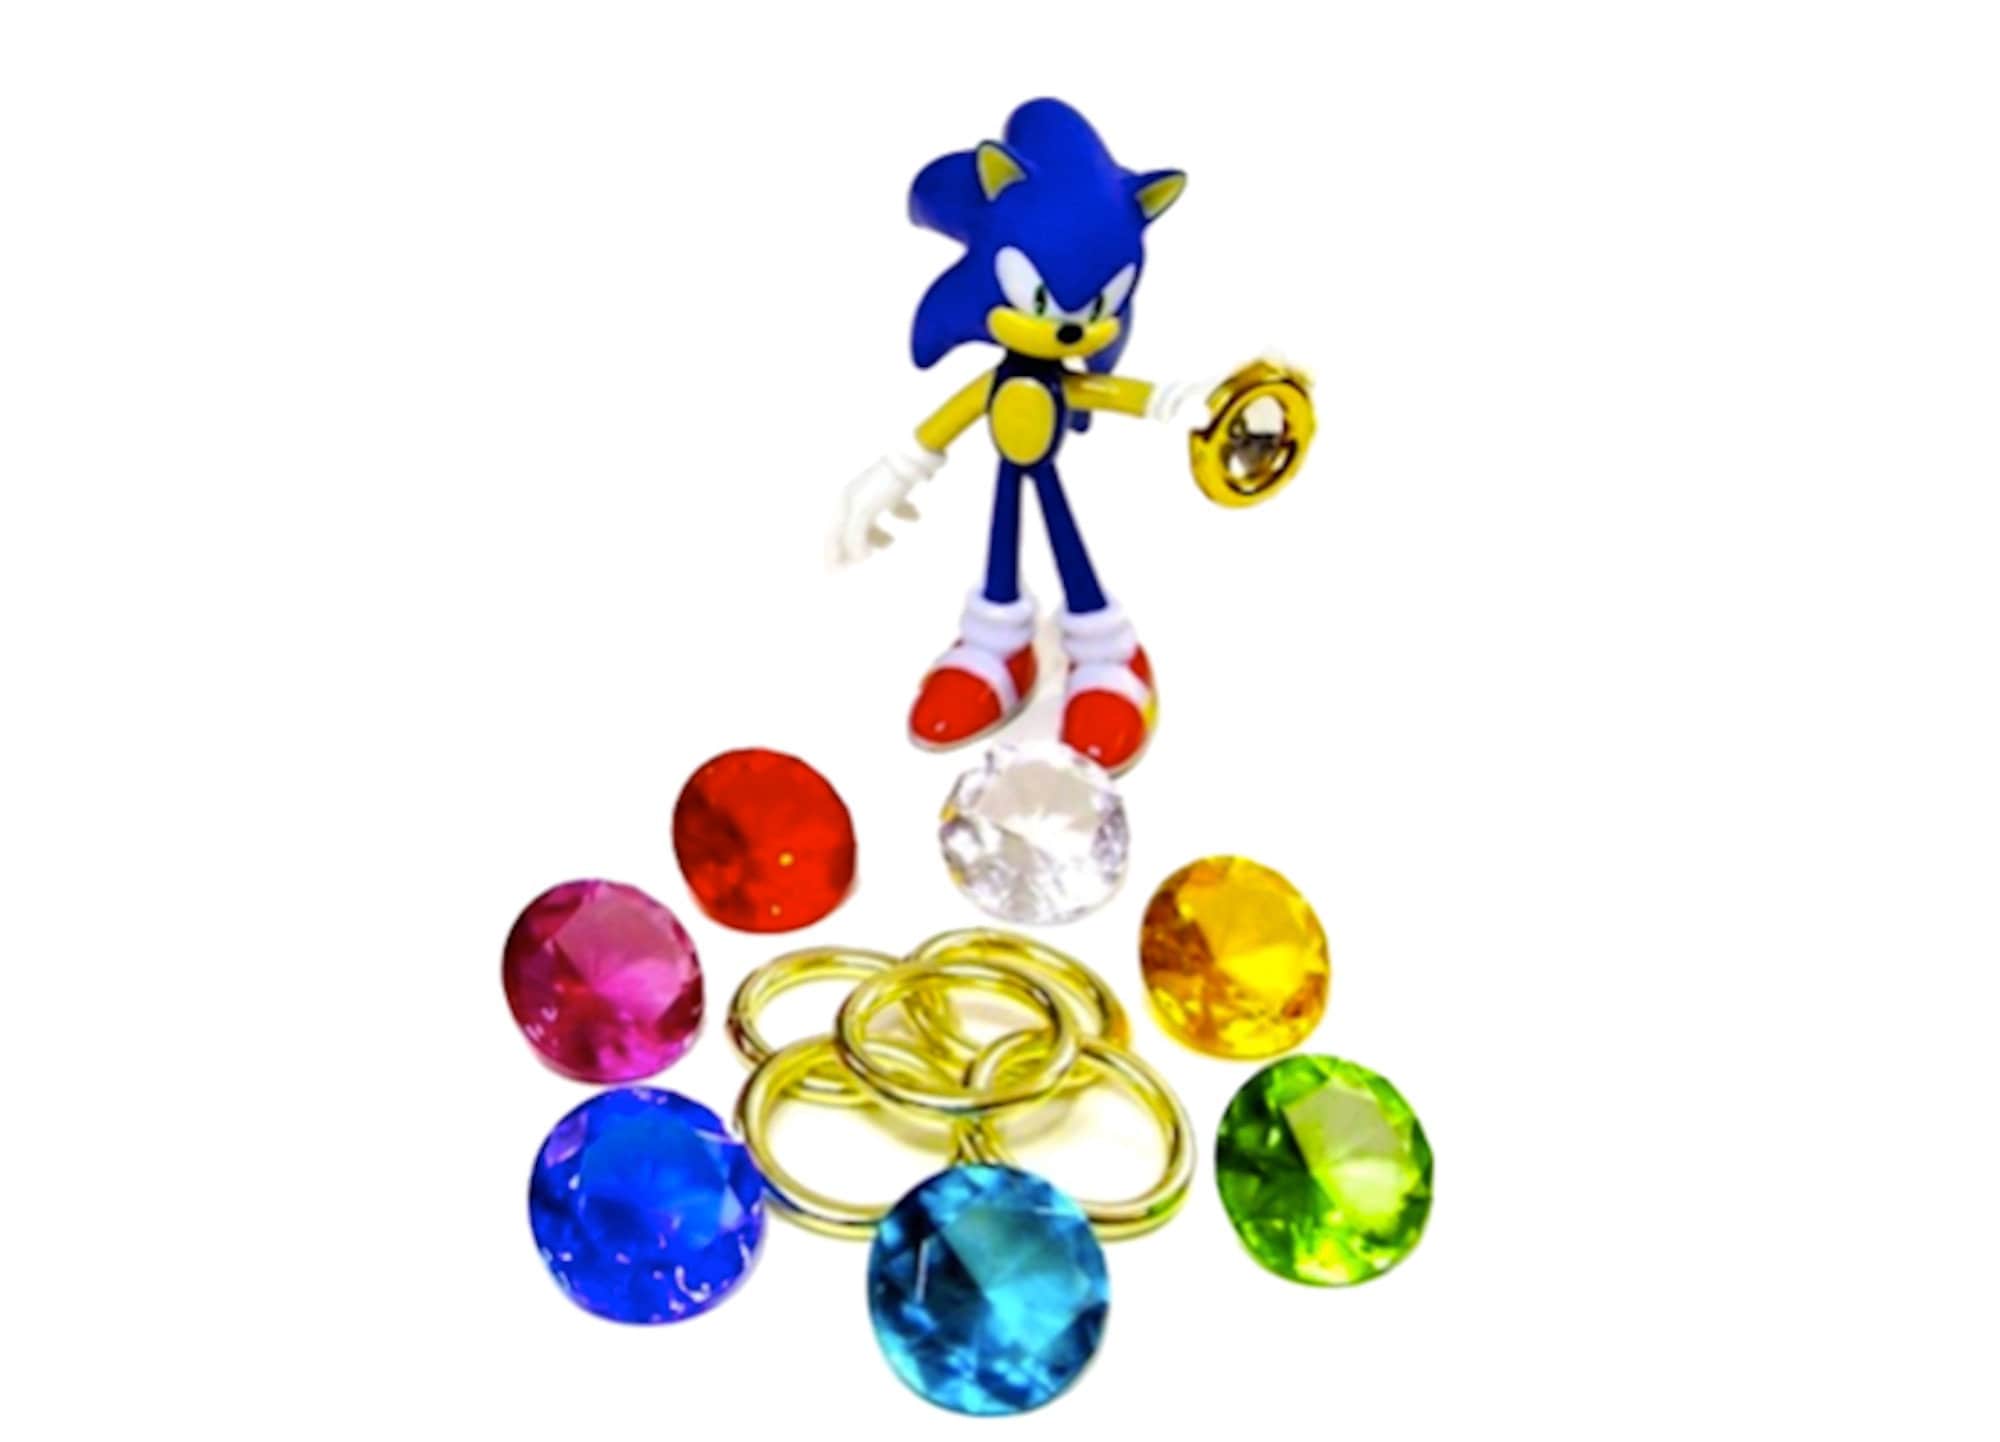 JAN142188 - SONIC CHAOS EMERALD SOURS CANDY TIN 18PC DISP